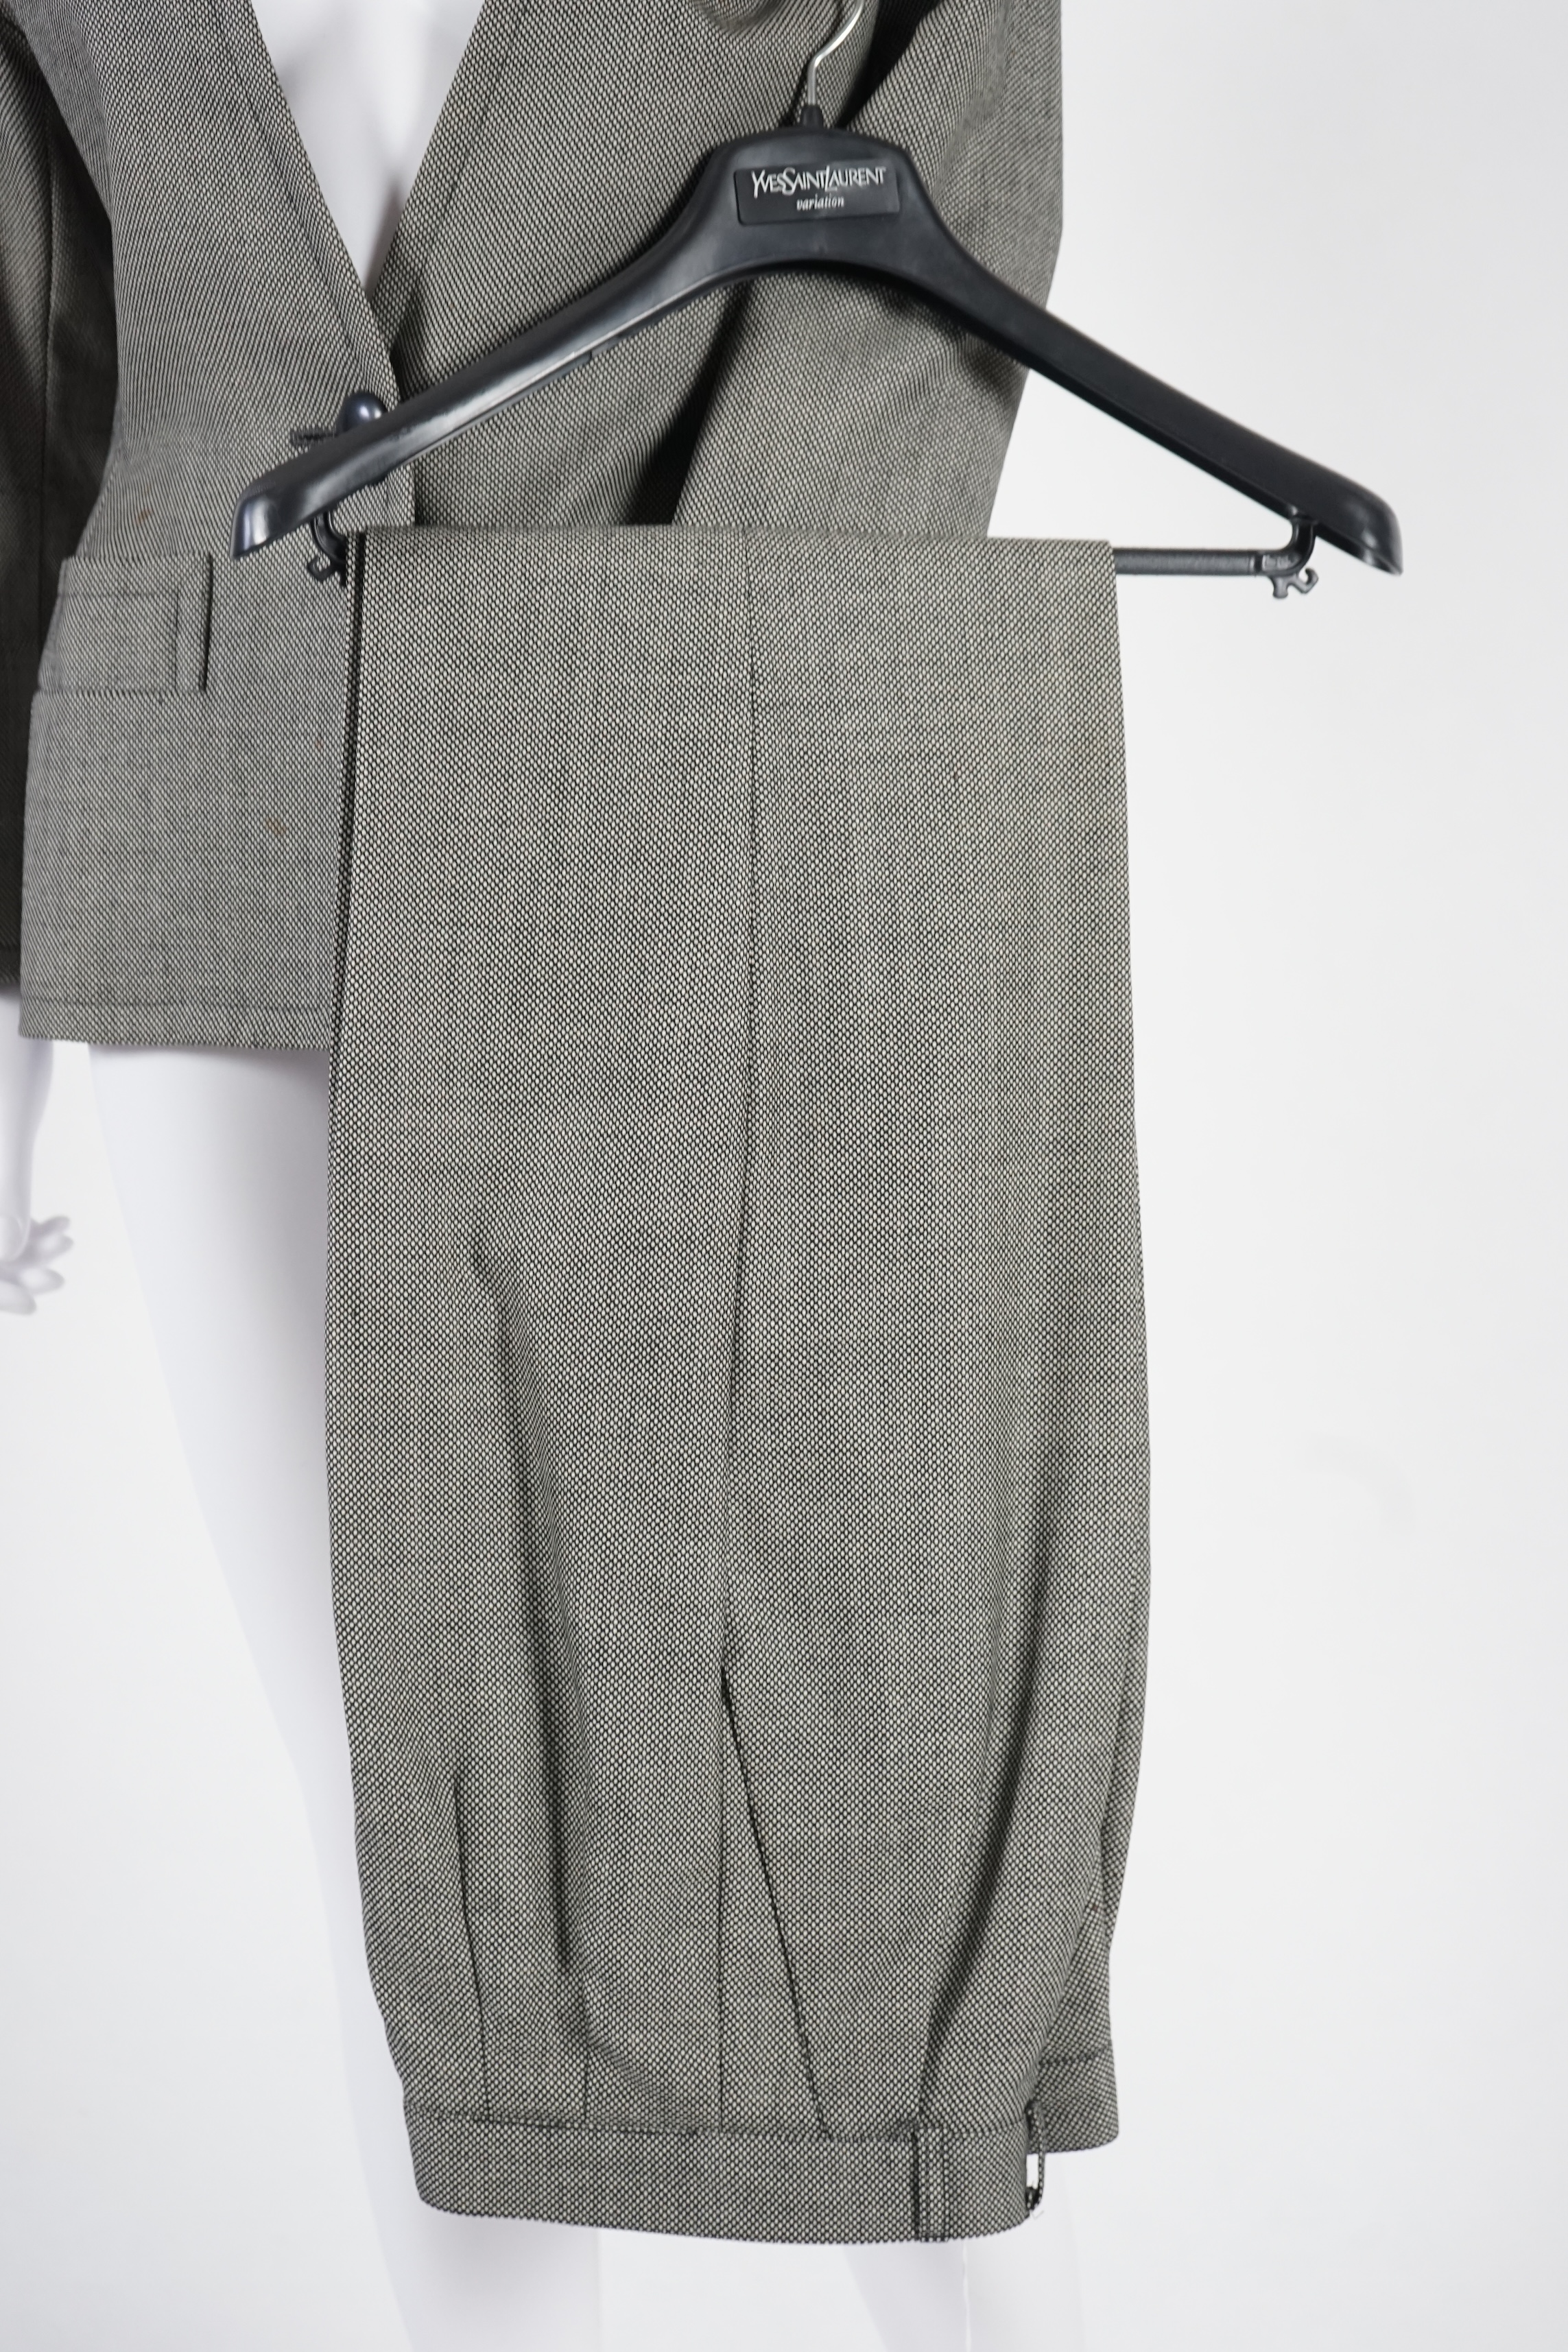 Two vintage Yves Saint Laurent variation lady's suits with matching trousers and skirts, F 40 (UK 12). Please note alterations to make the waist smaller may have been carried out on some of the skirts. Proceeds to Happy